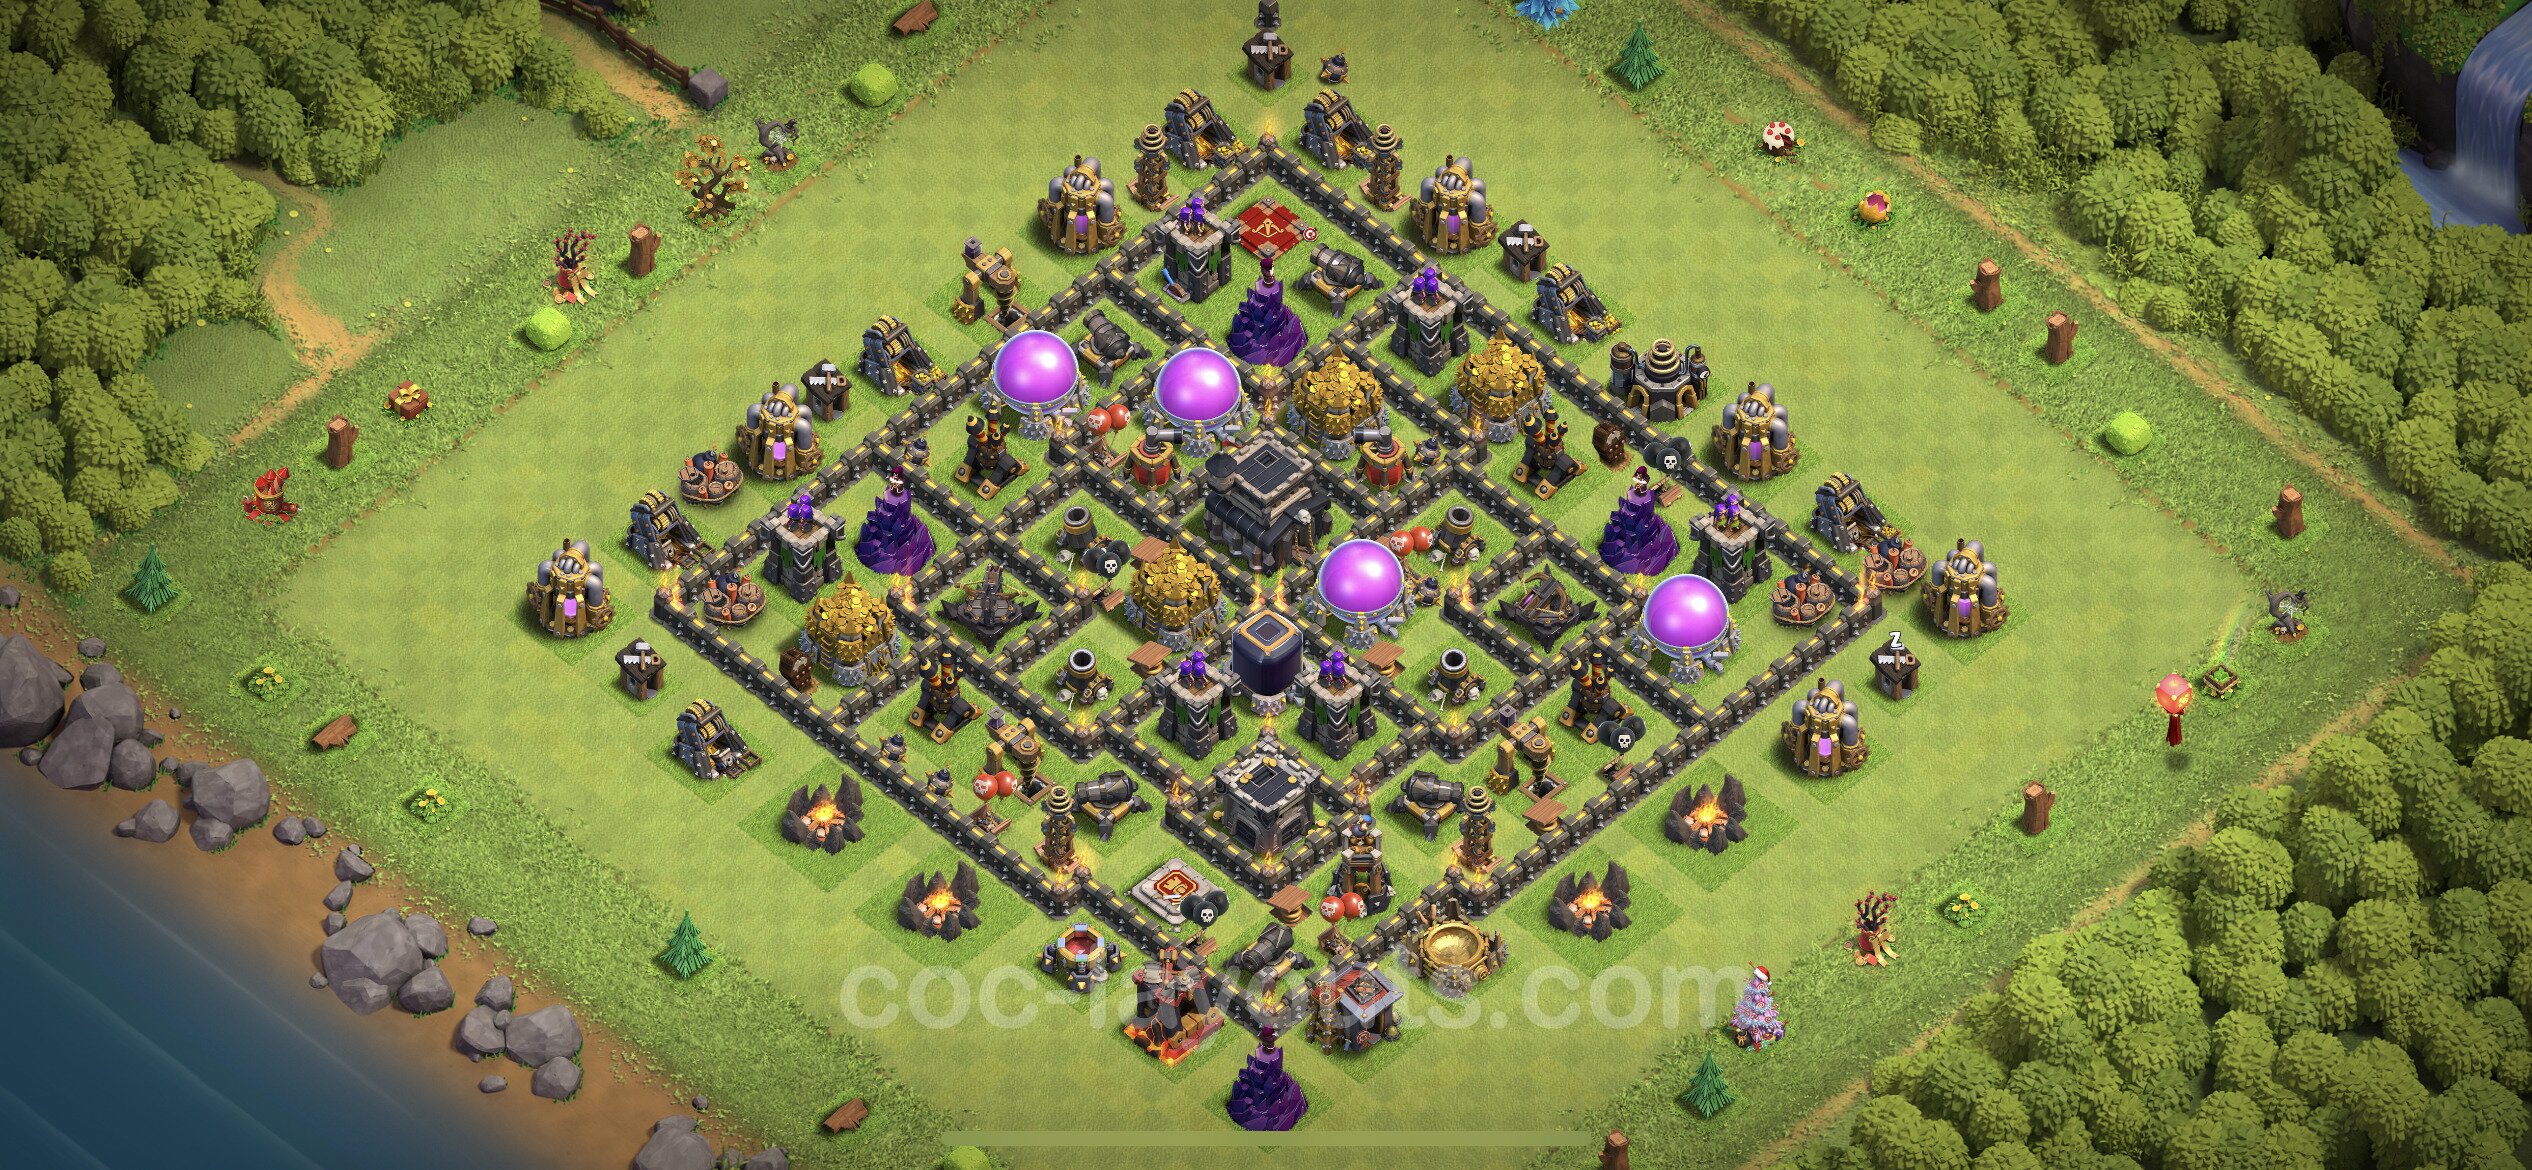 Farming Base TH9 Max Levels with Link, Hybrid - Town Hall Le